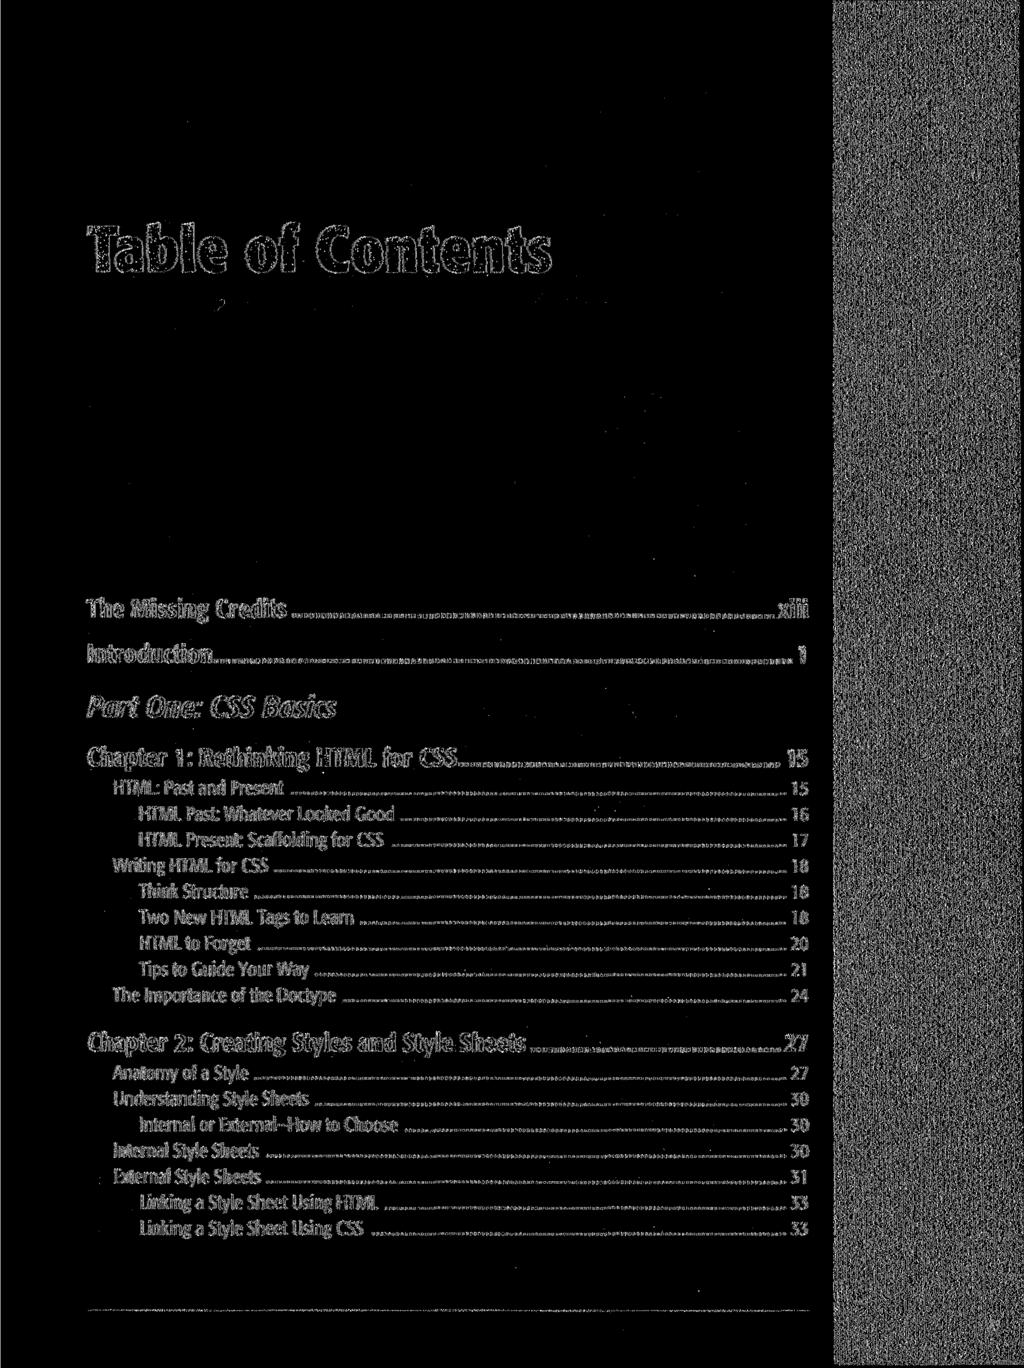 Table of Contents The Missing Credits Introduction xiii I Part One: CSS Basics Chapter 1: Rethinking HTML for CSS 15 HTML: Past and Present 15 HTML Past: Whatever Looked Good 16 HTML Present: